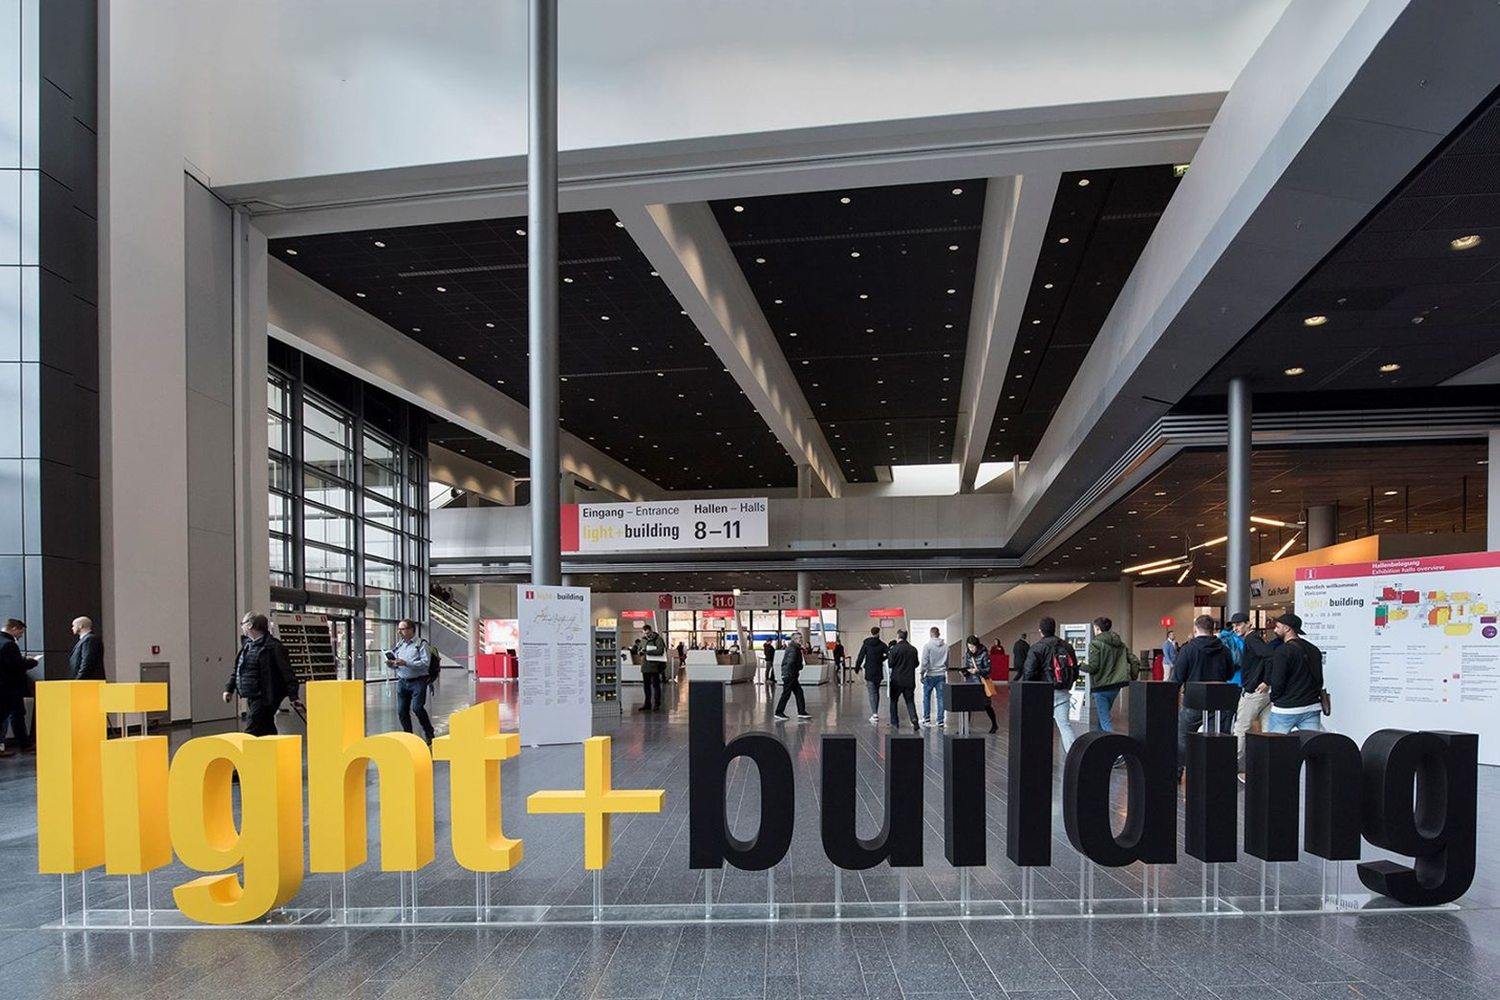 Light + Building Autumn Edition 2022 -we look forward to seeing you at our stand